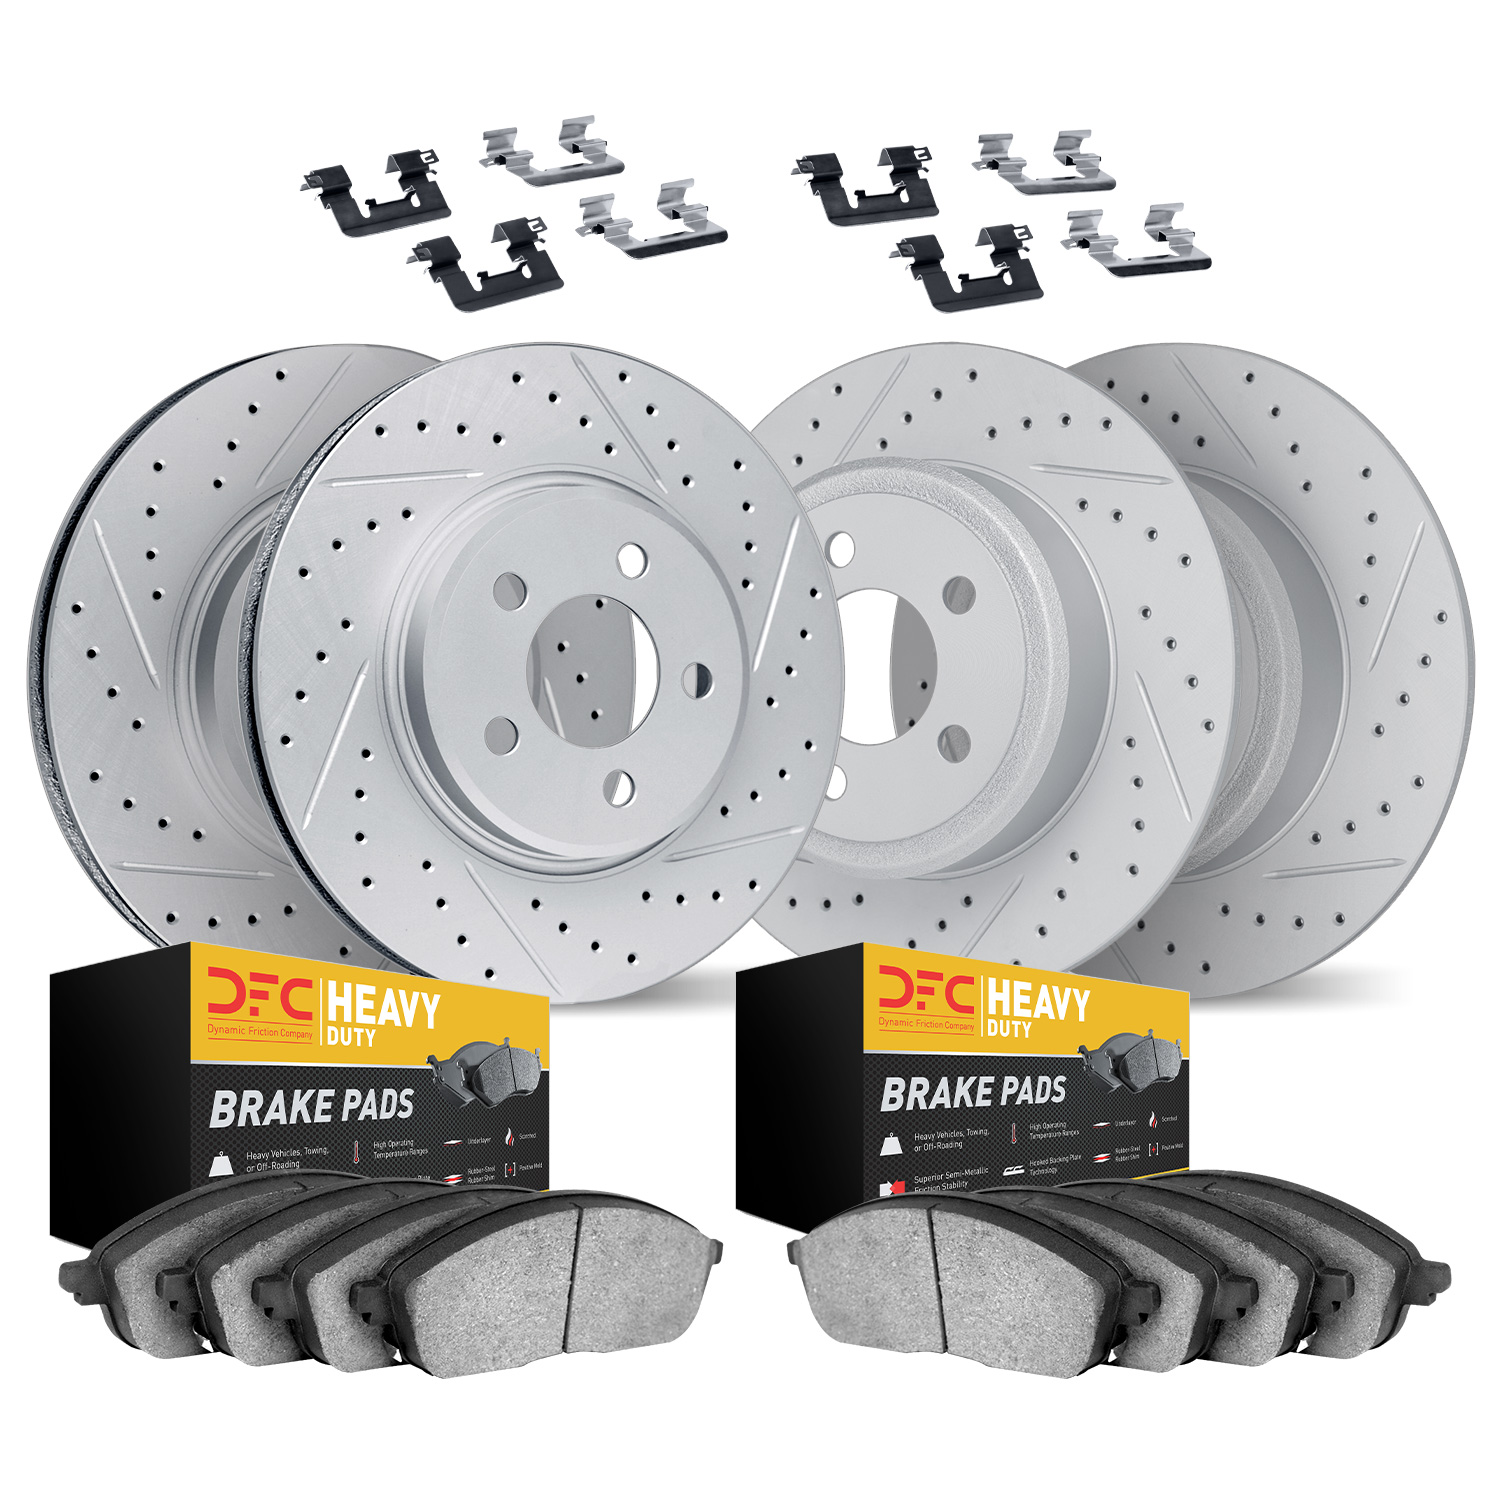 2214-42026 Geoperformance Drilled/Slotted Rotors w/Heavy-Duty Pads Kit & Hardware, 1993-1994 Mopar, Position: Front and Rear